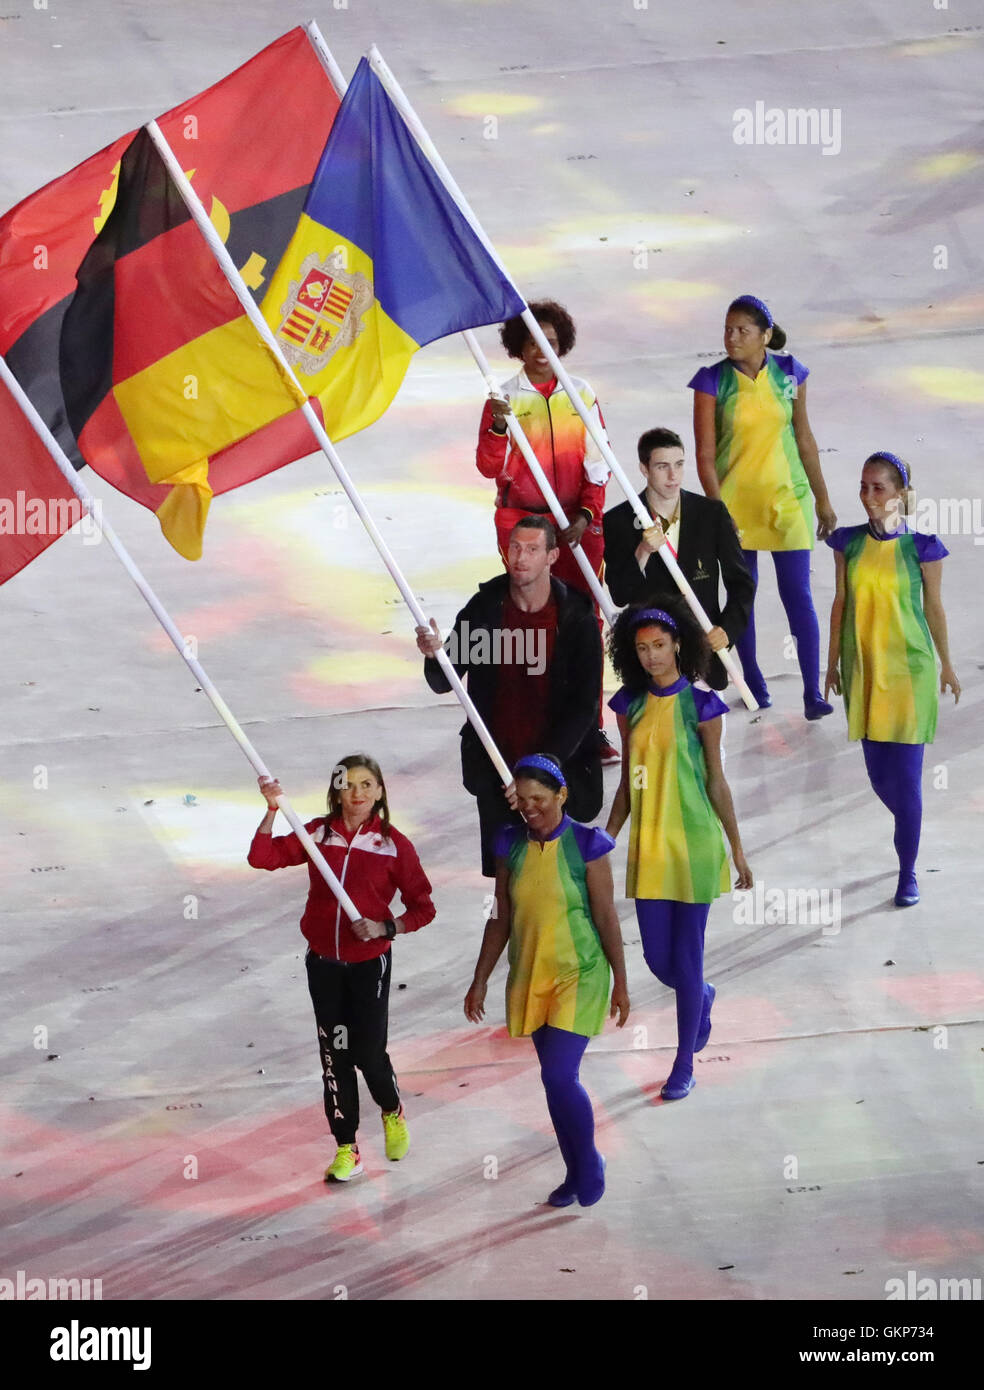 Rio de Janeiro, Brazil. 21st Aug, 2016. Sebastian Brendel of Germany walks behind Luiza Gega of Albania as flag bearers from various countries march into the stadium during the Closing Ceremony of the Rio 2016 Olympic Games at Maracana in Rio de Janeiro, Brazil, 21 August 2016. Photo: Michael Kappeler/dpa/Alamy Live News Stock Photo